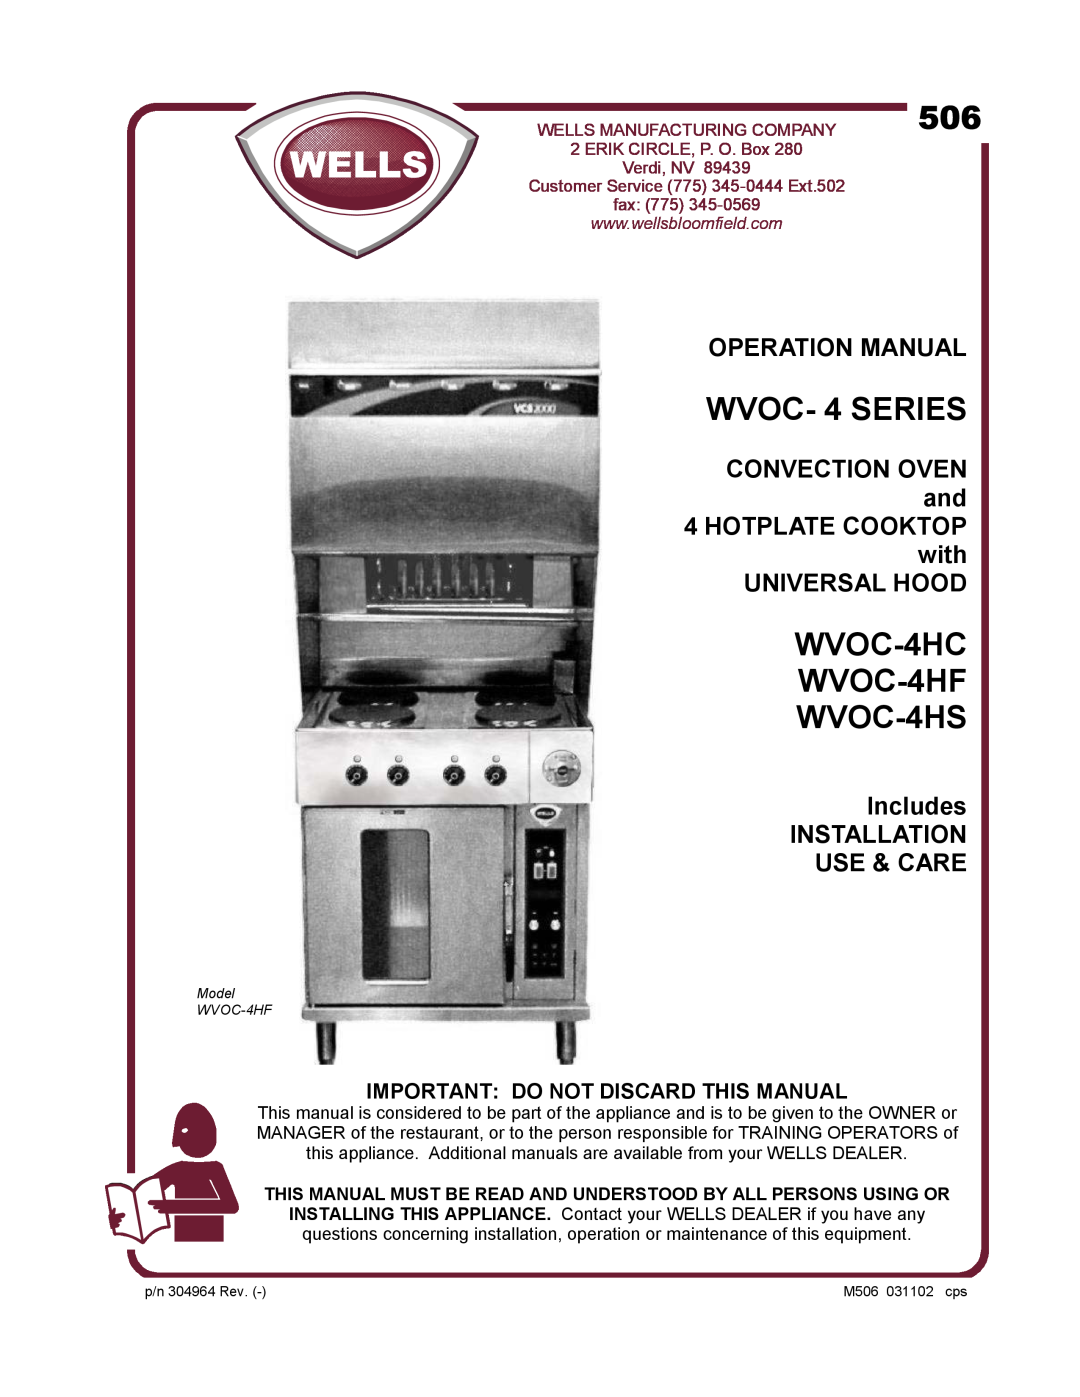 Wells WVOC-4HS operation manual CONVECTION OVEN and, Universal Hood, Includes INSTALLATION USE & CARE, WVOC- 4 SERIES, fax 